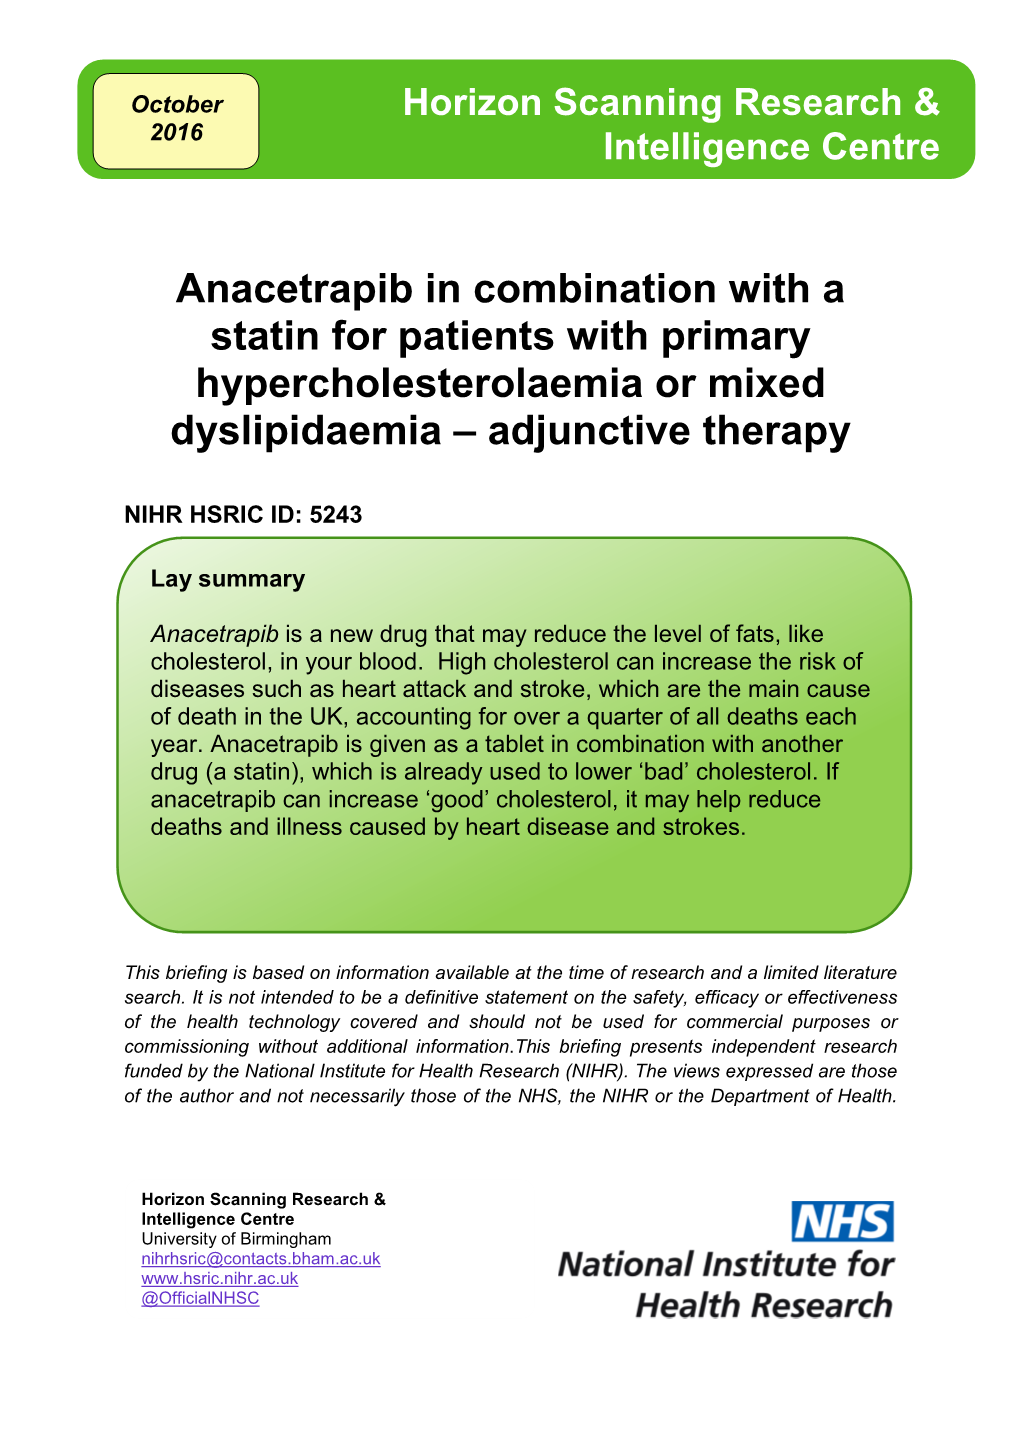 Anacetrapib in Combination with a Statin for Patients with Primary Hypercholesterolaemia Or Mixed Dyslipidaemia – Adjunctive Therapy